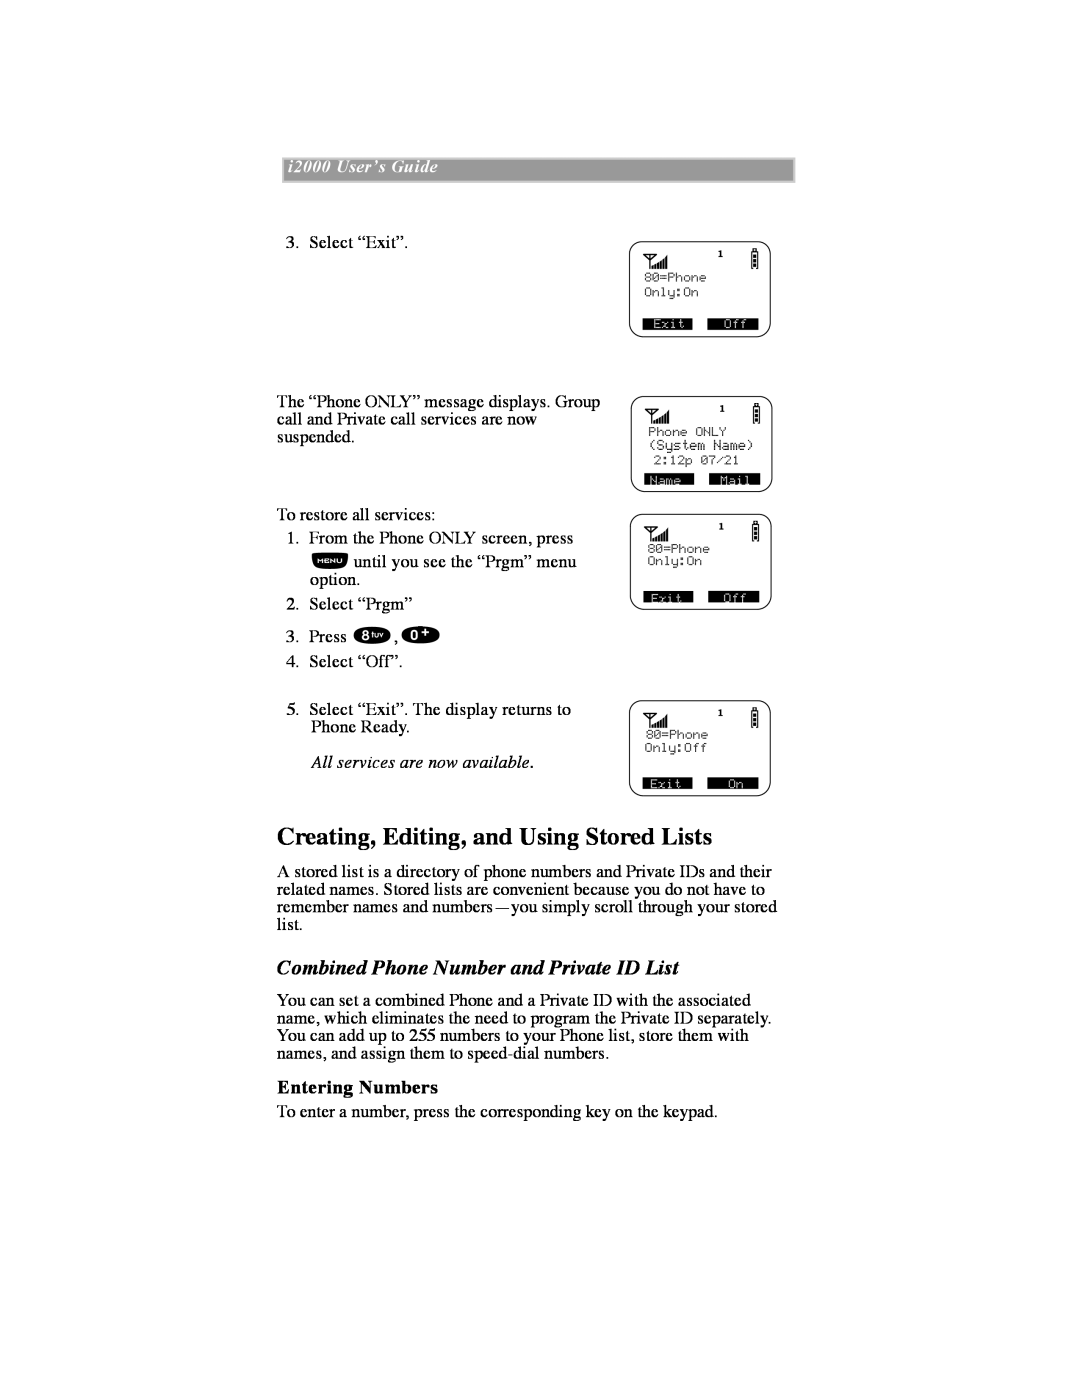 Motorola iDEN manual Creating, Editing, and Using Stored Lists, Combined Phone Number and Private ID List, Entering Numbers 